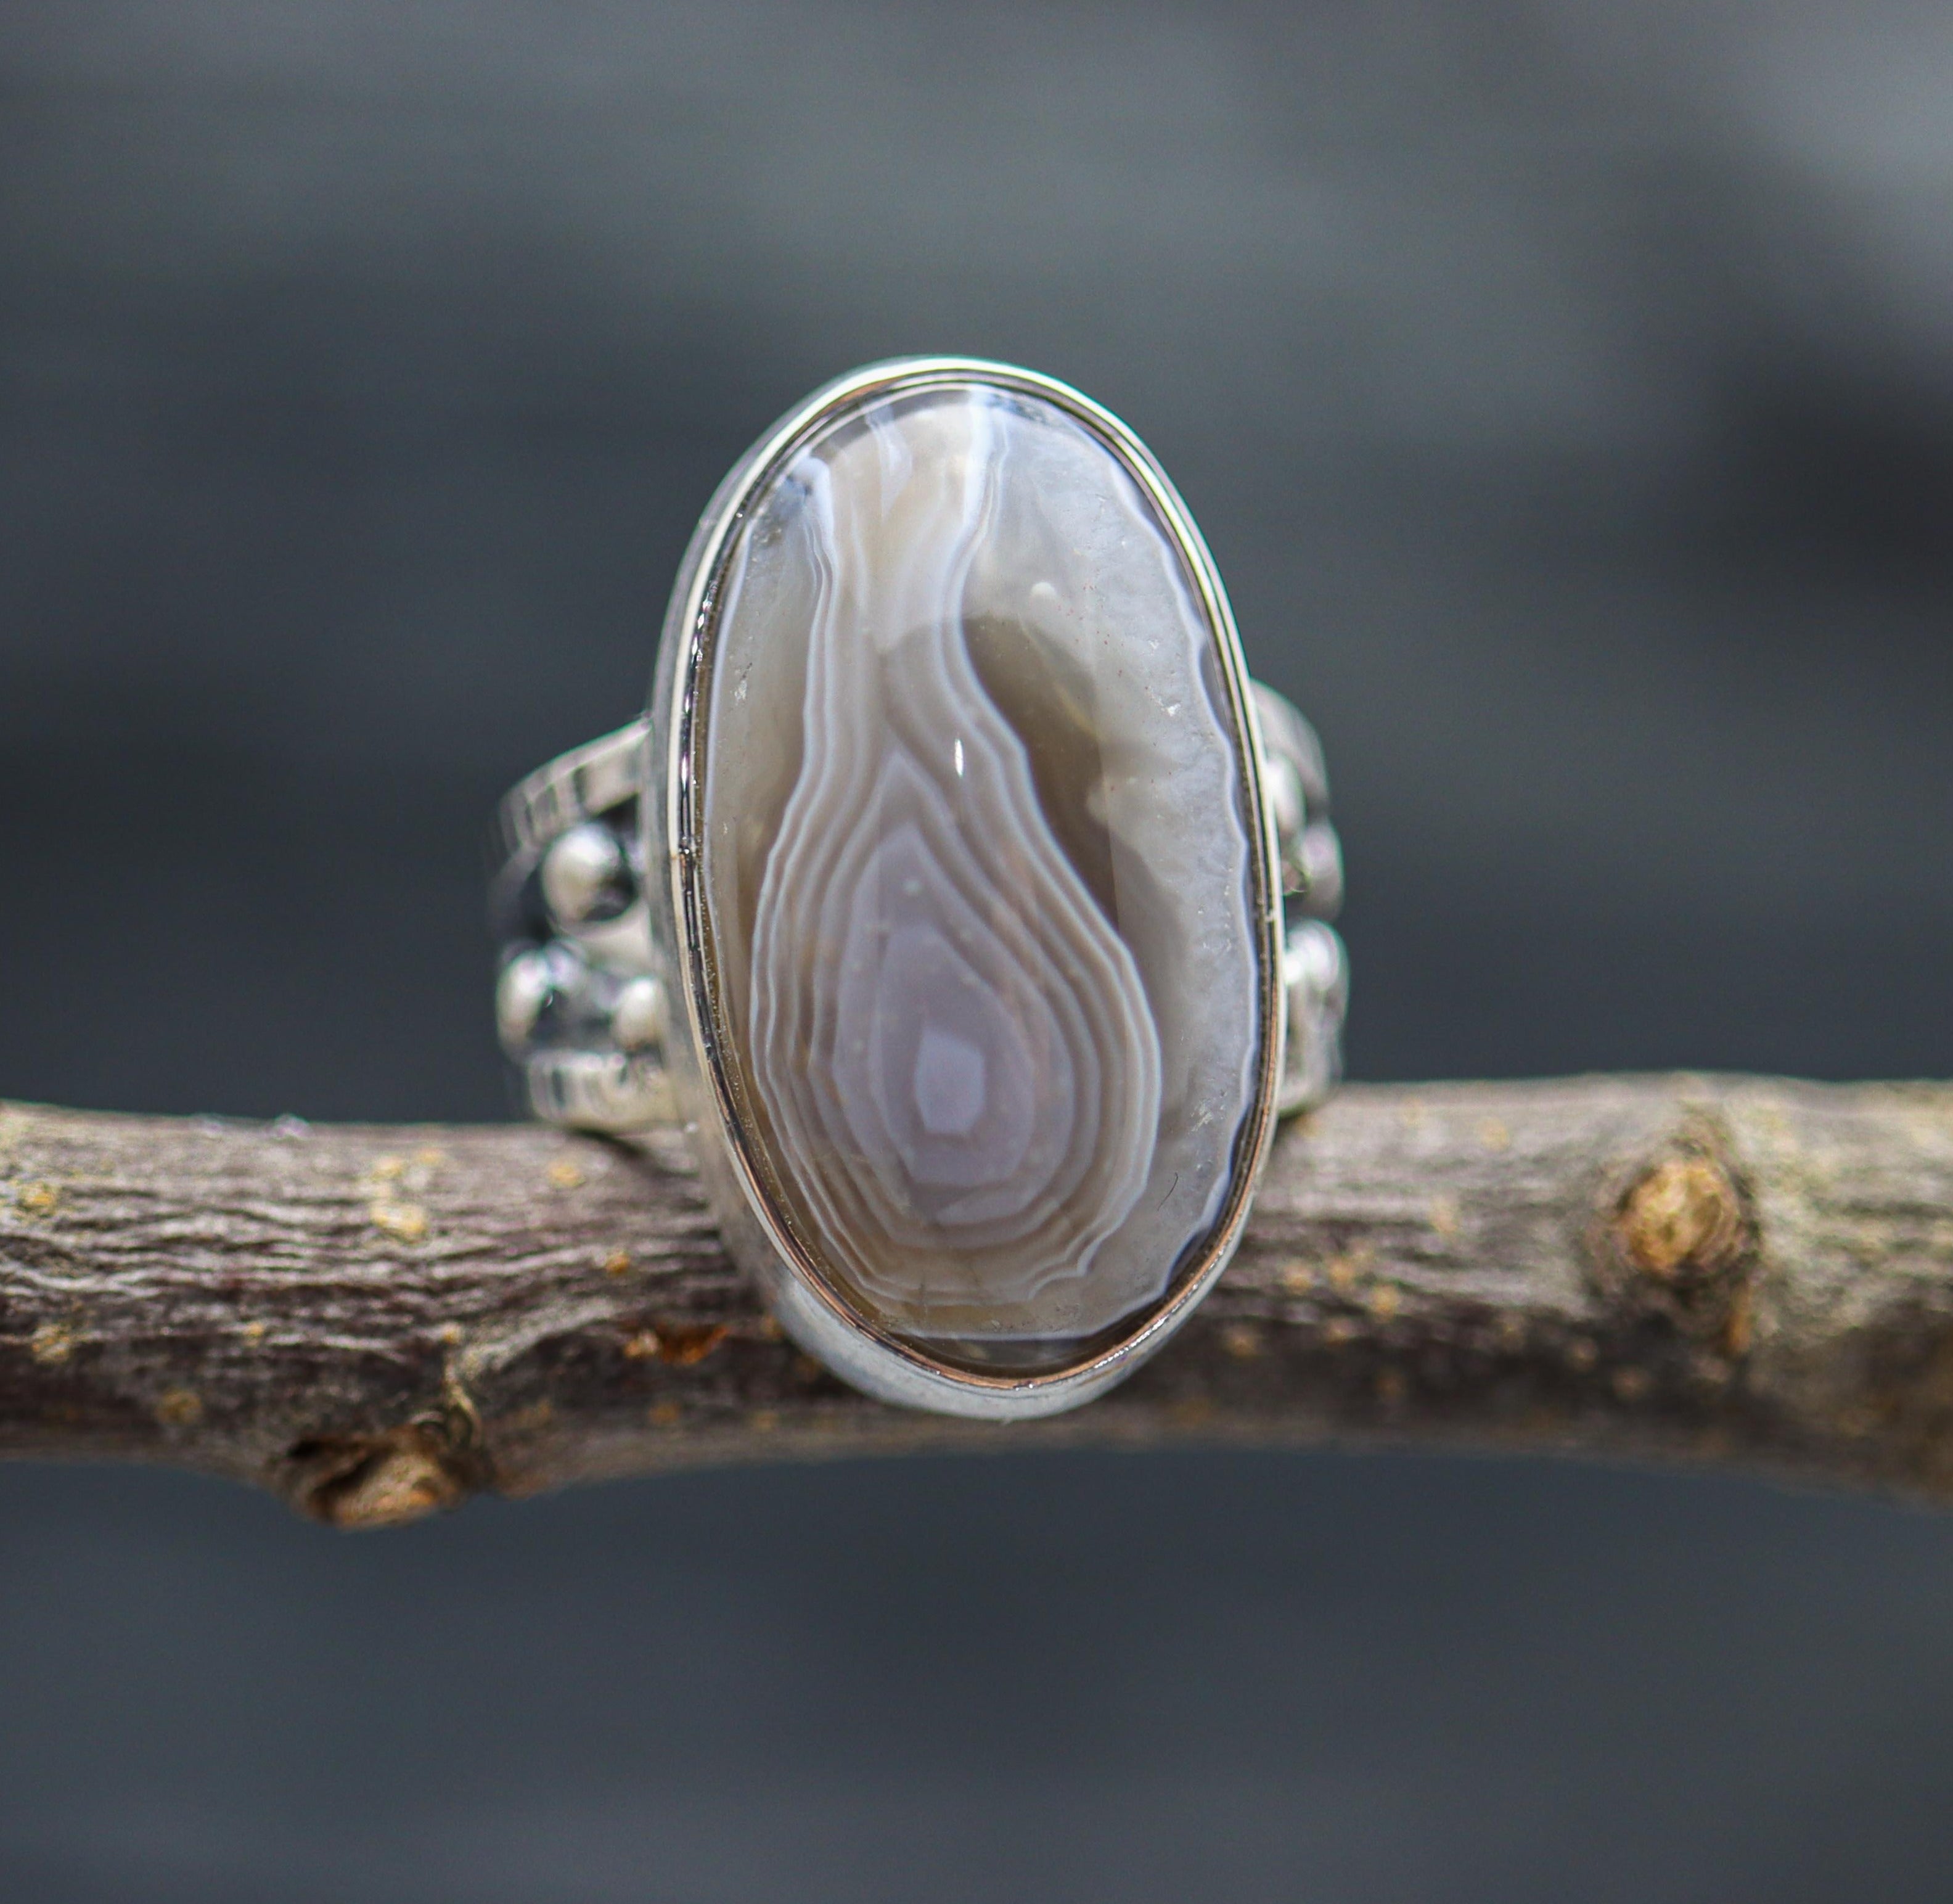 Botswana Agate Sterling Silver Bubble Band Ring Size 6